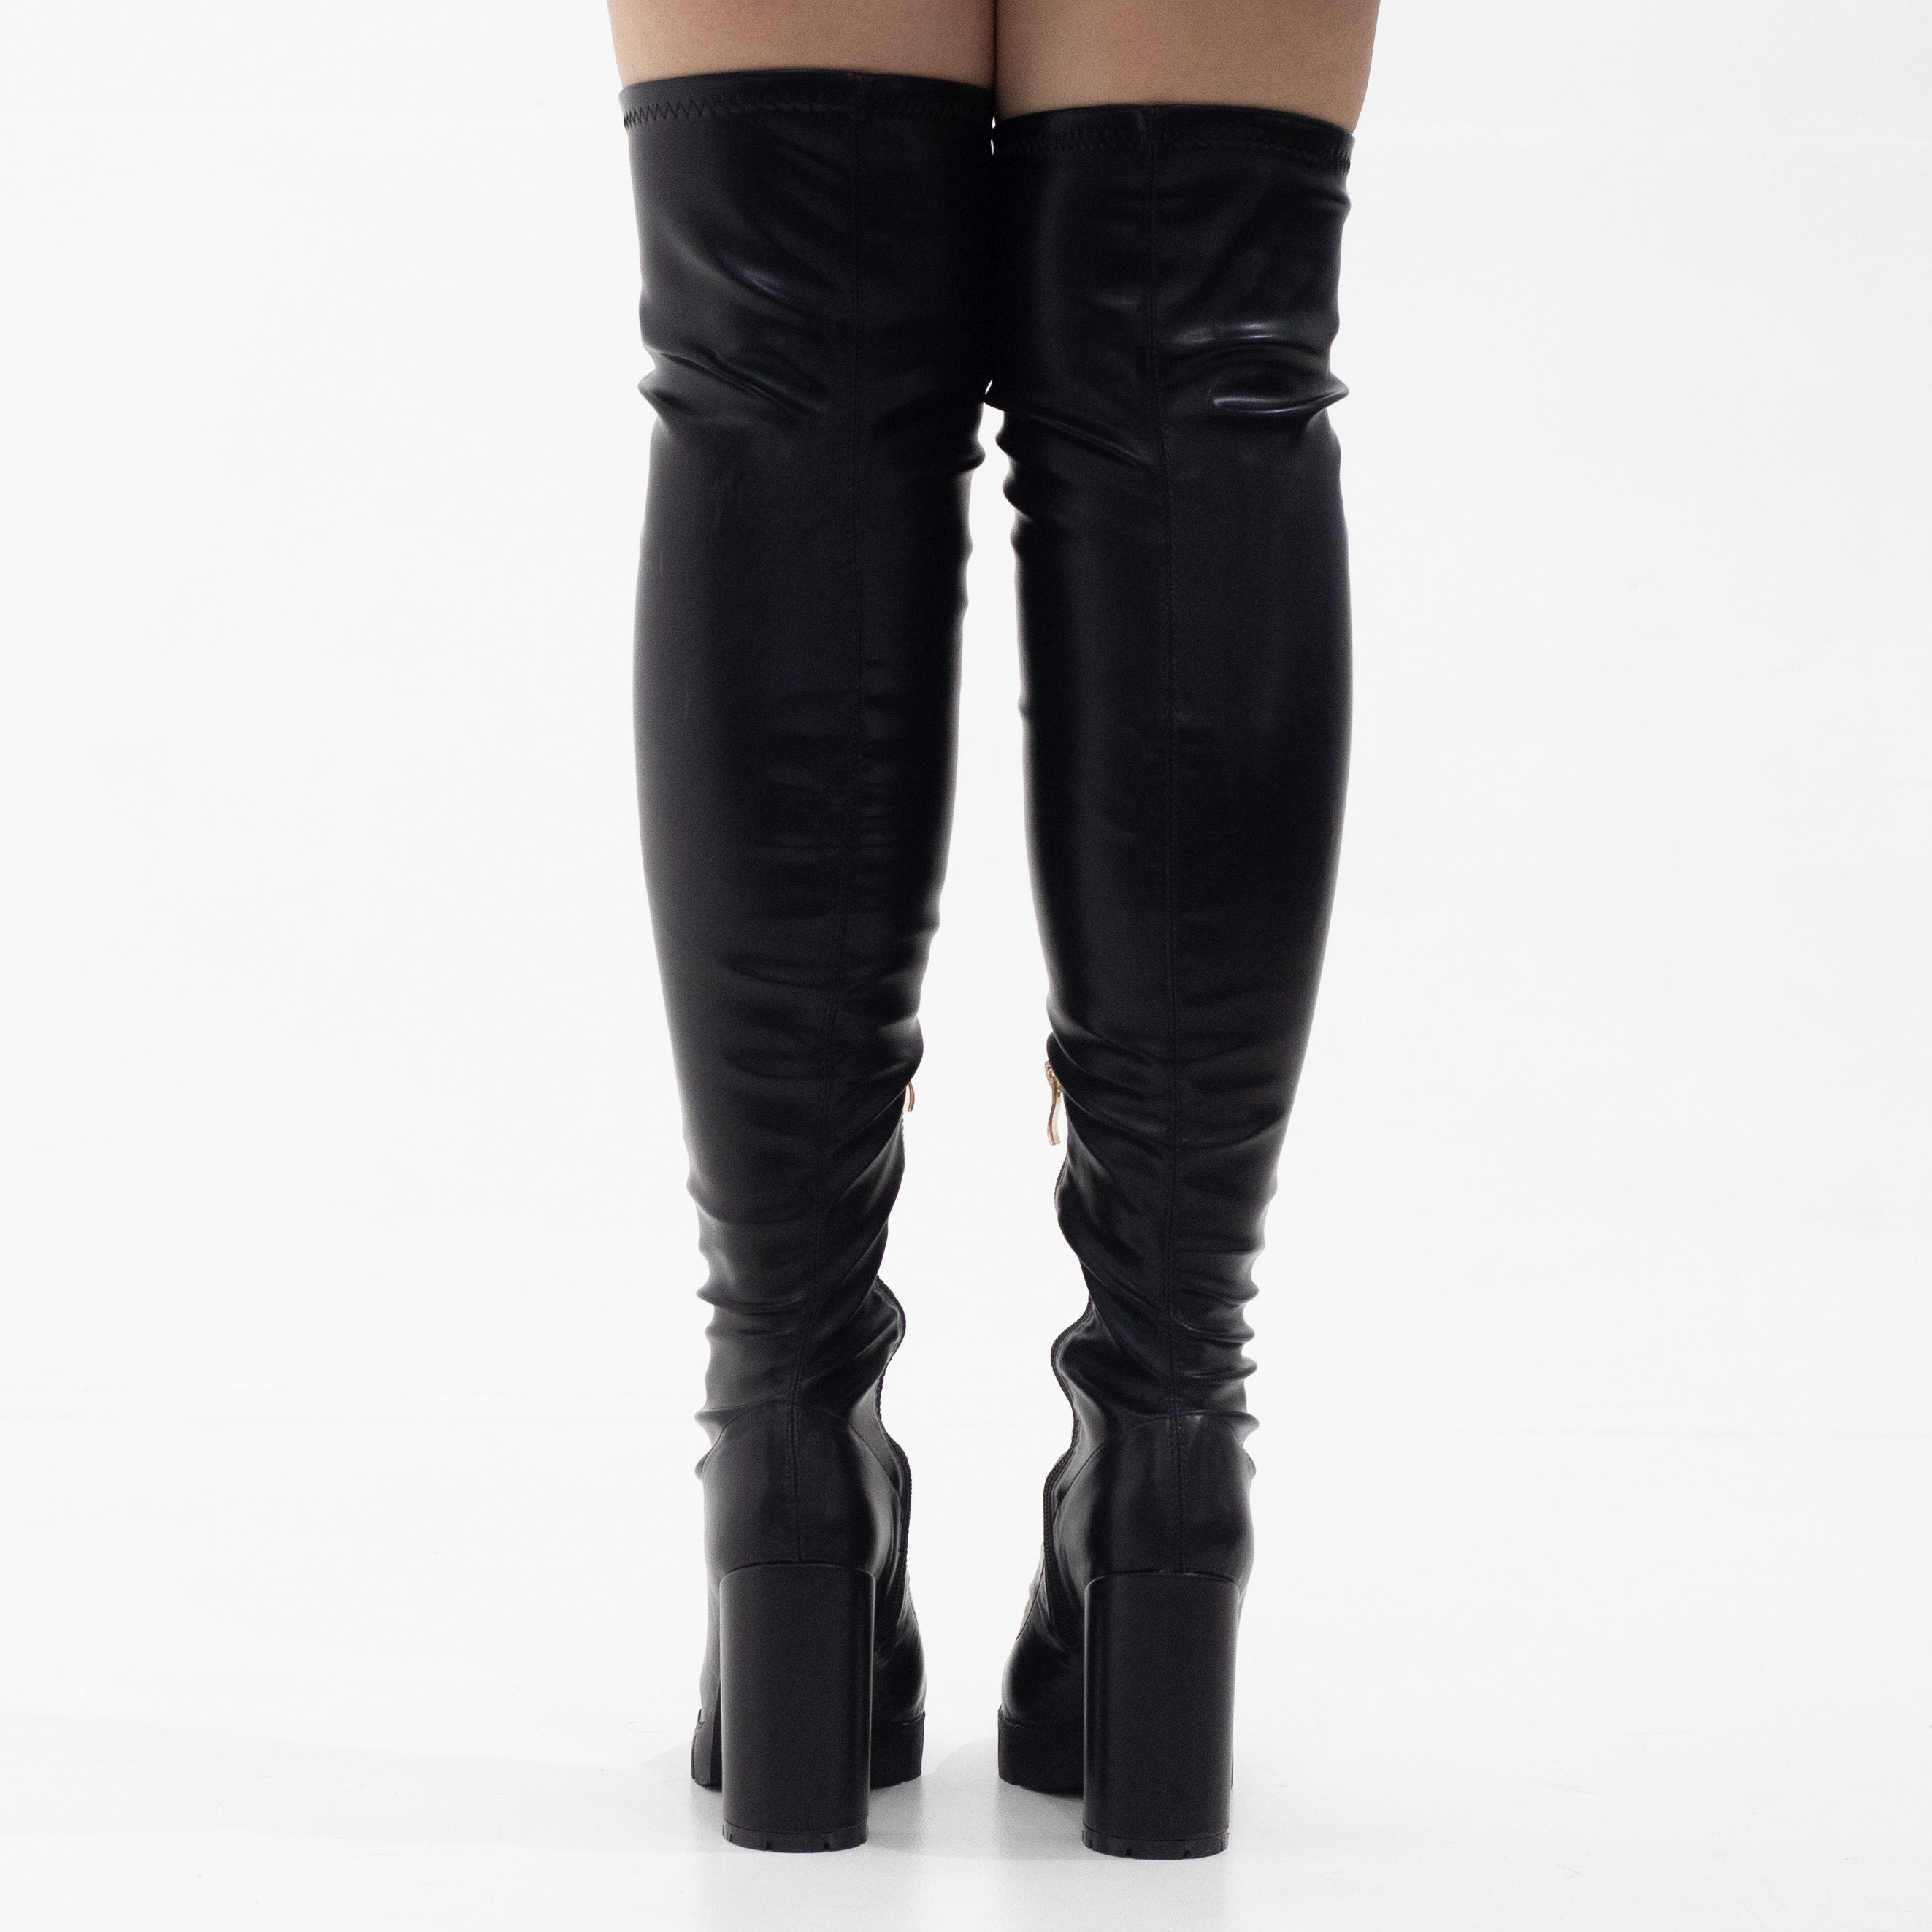 Black Suede Cut Out Cage Thigh High Gothic Stiletto High Heels Boots Shoes